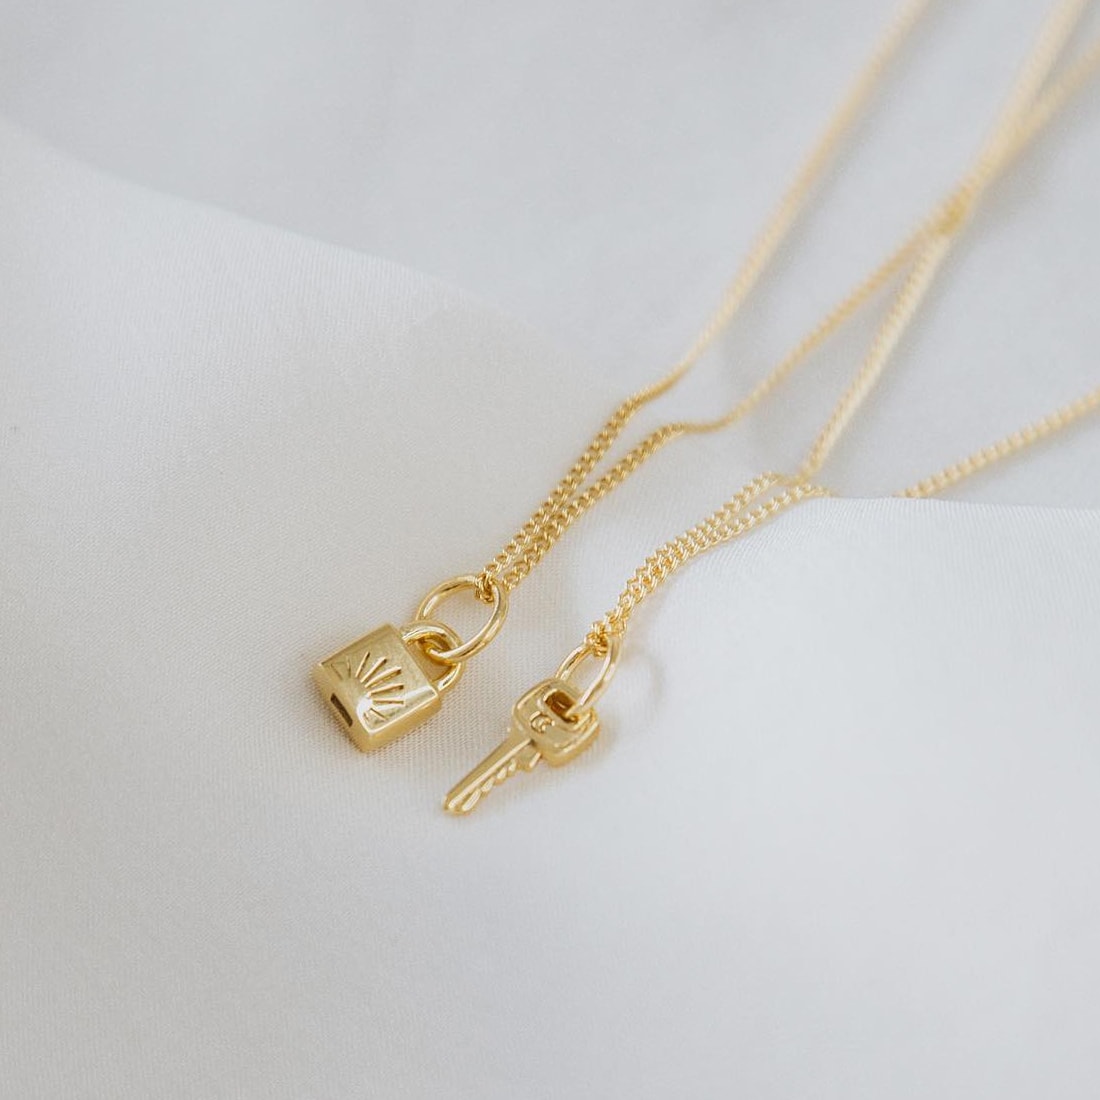 lock and key necklace gold